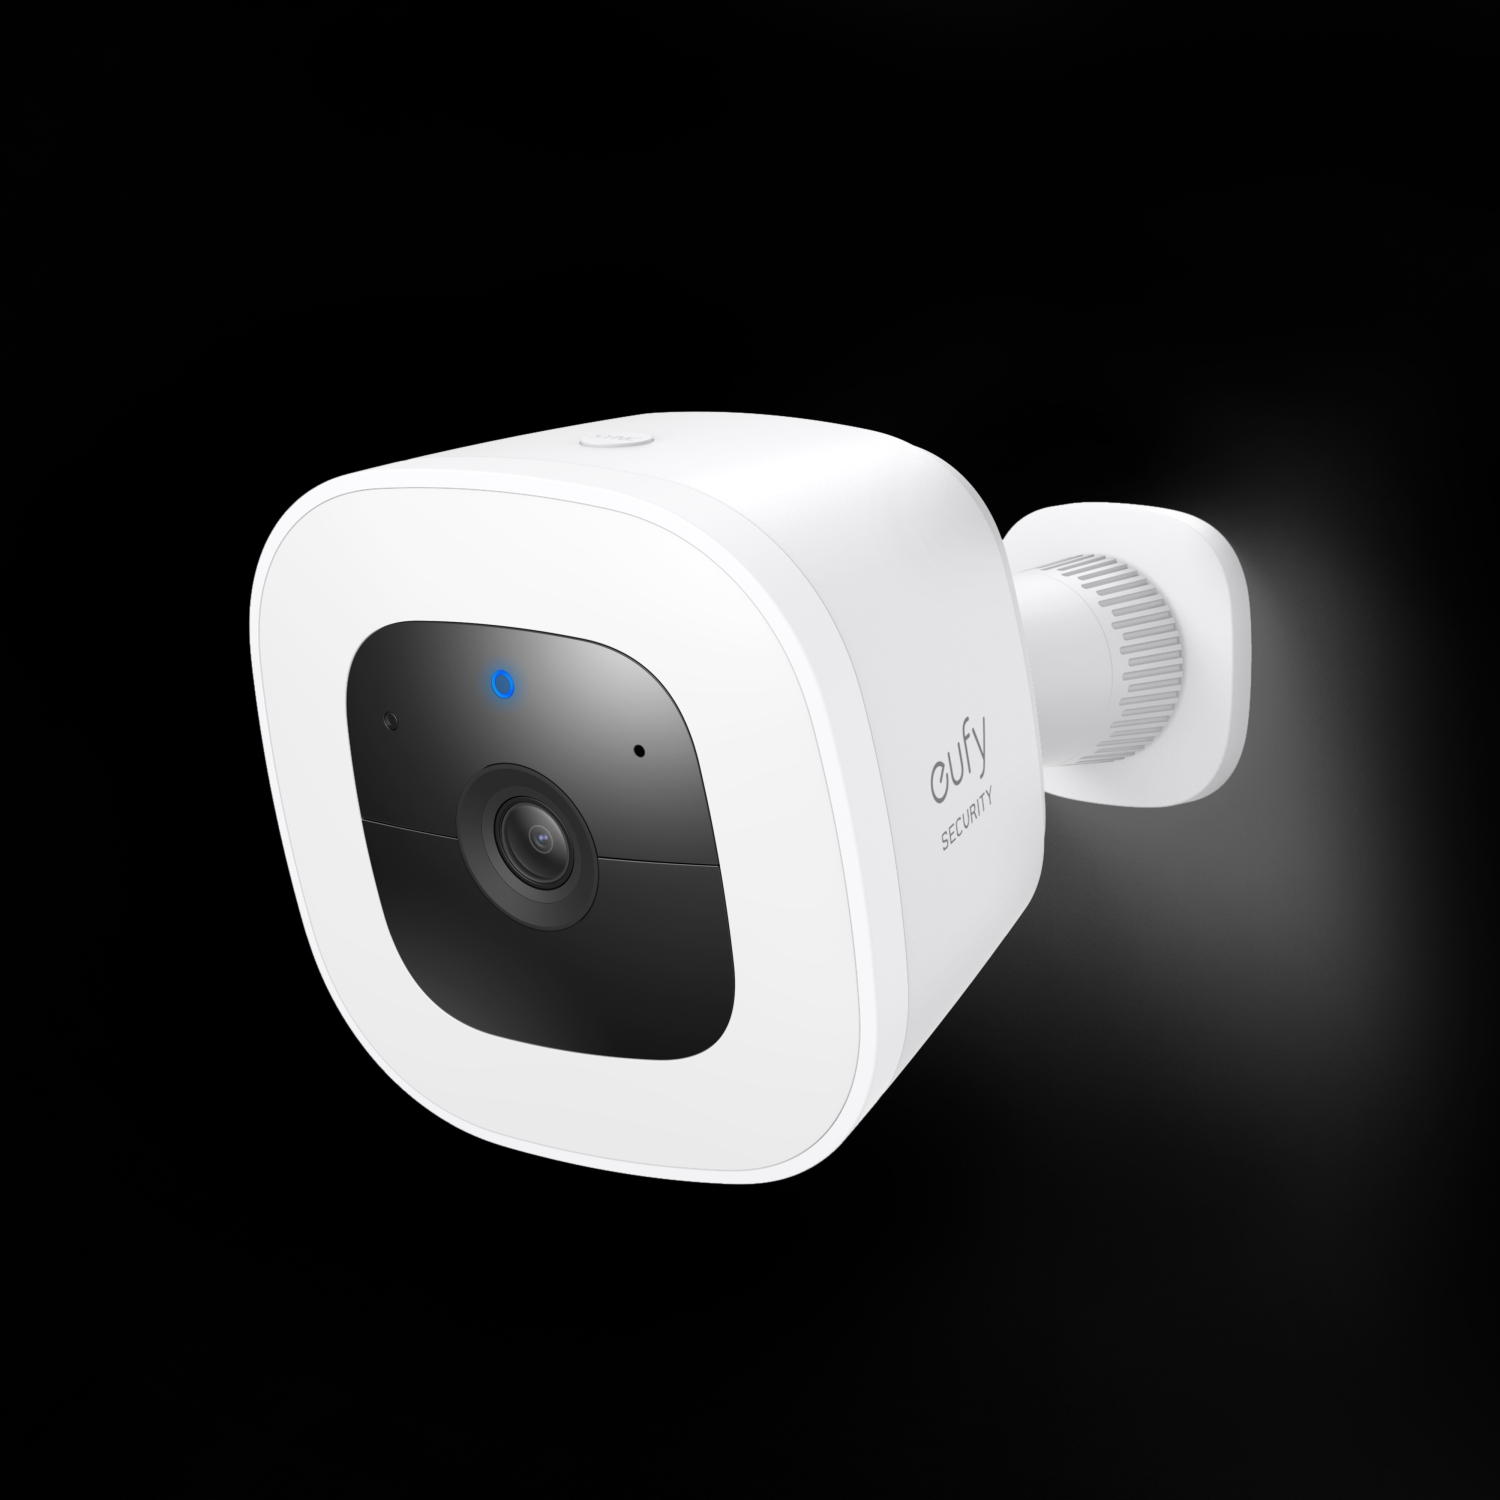 Eufy's New Floodlight Camera Can Pan and Tilt 360 Degrees